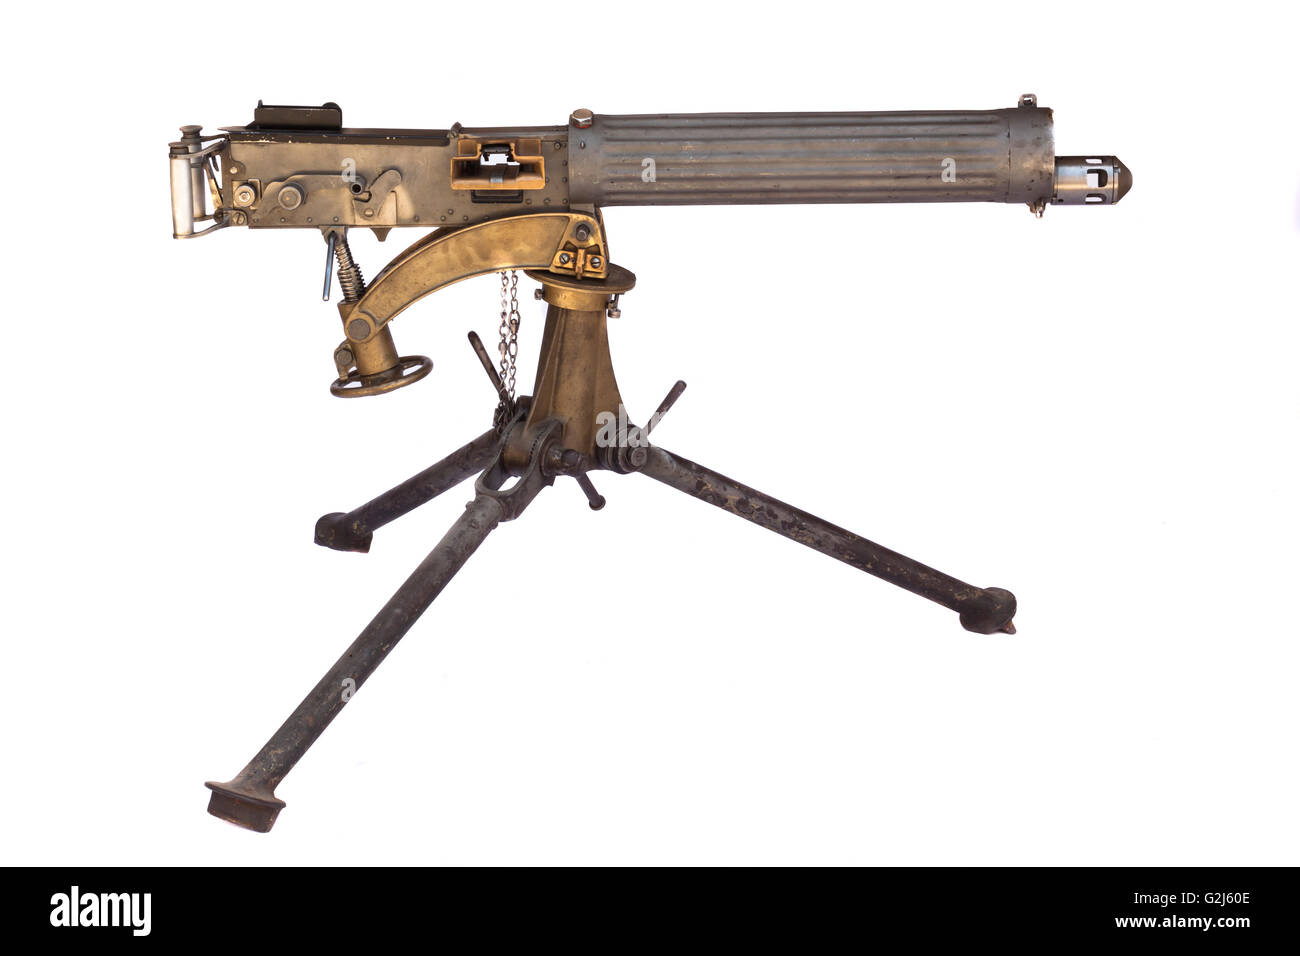 WWII old heavy machine gun isolated on white background Stock Photo